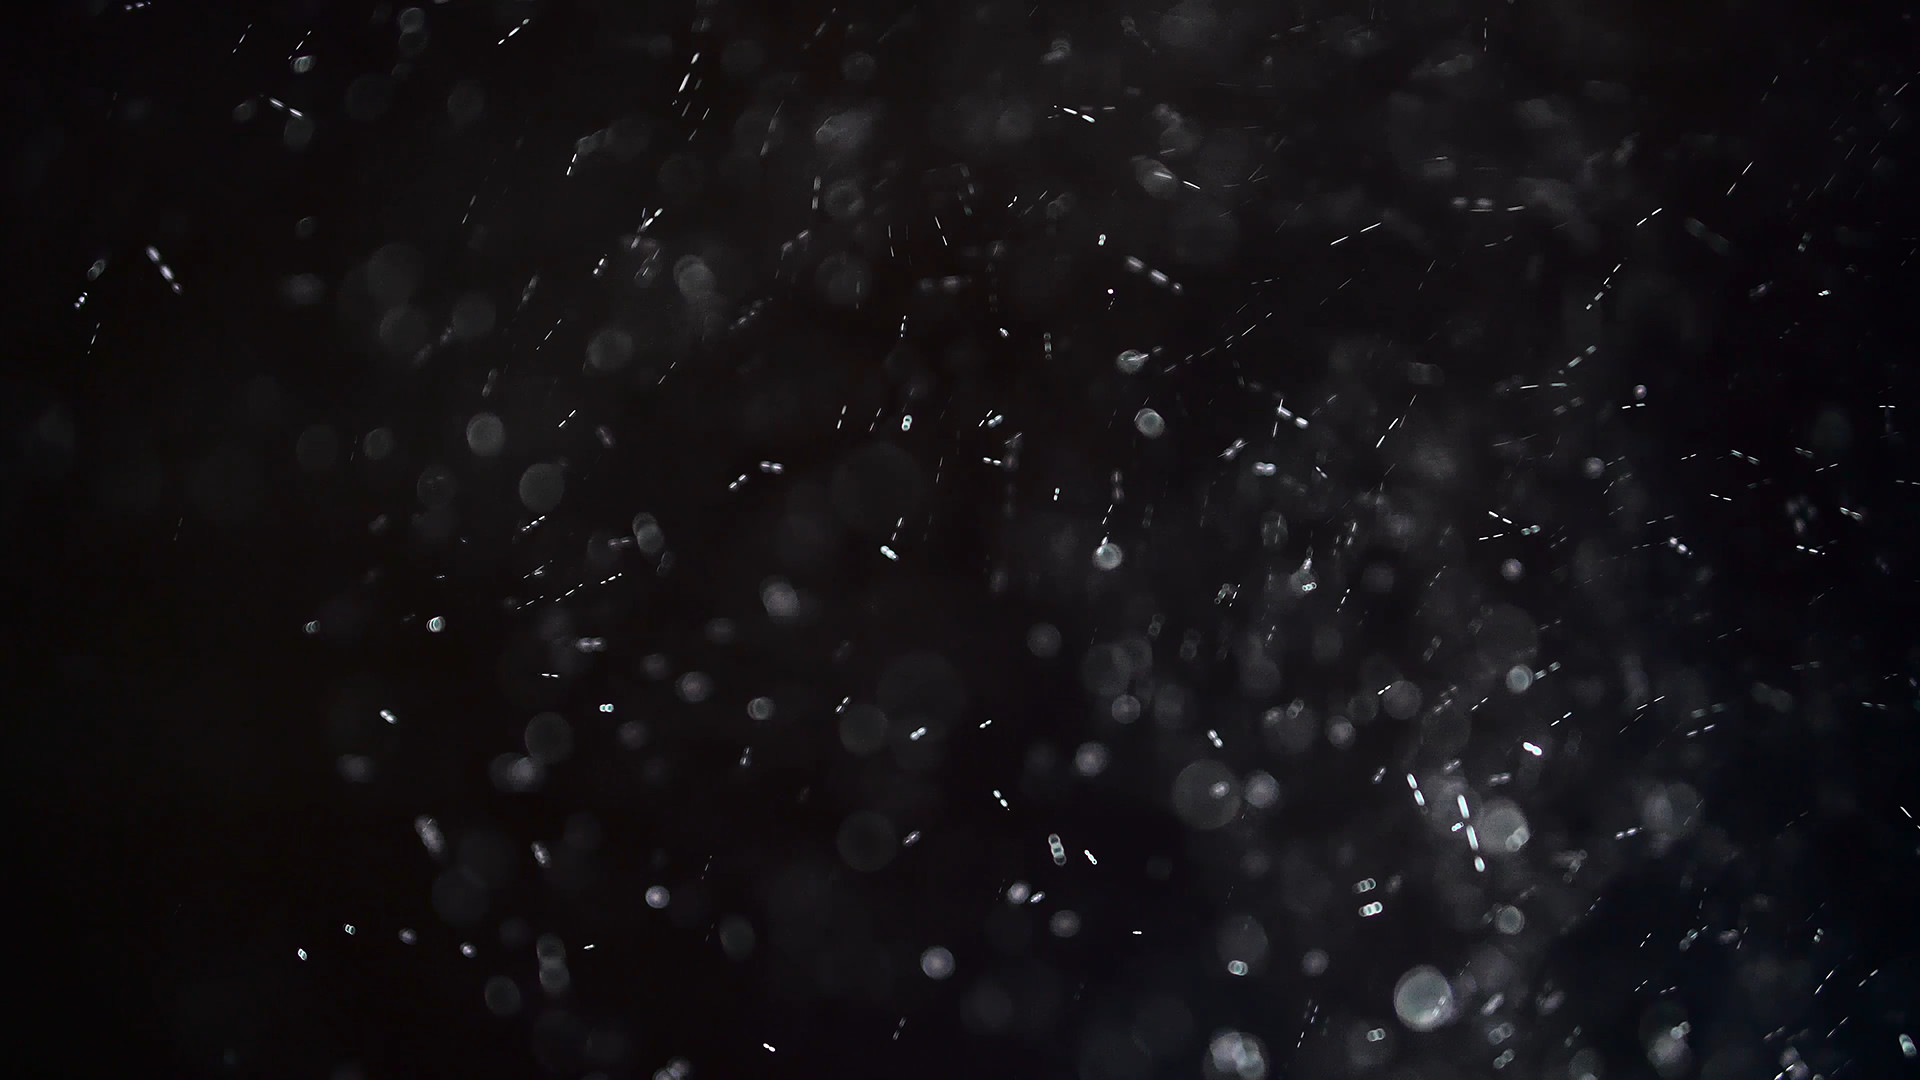 dust particles after effects download